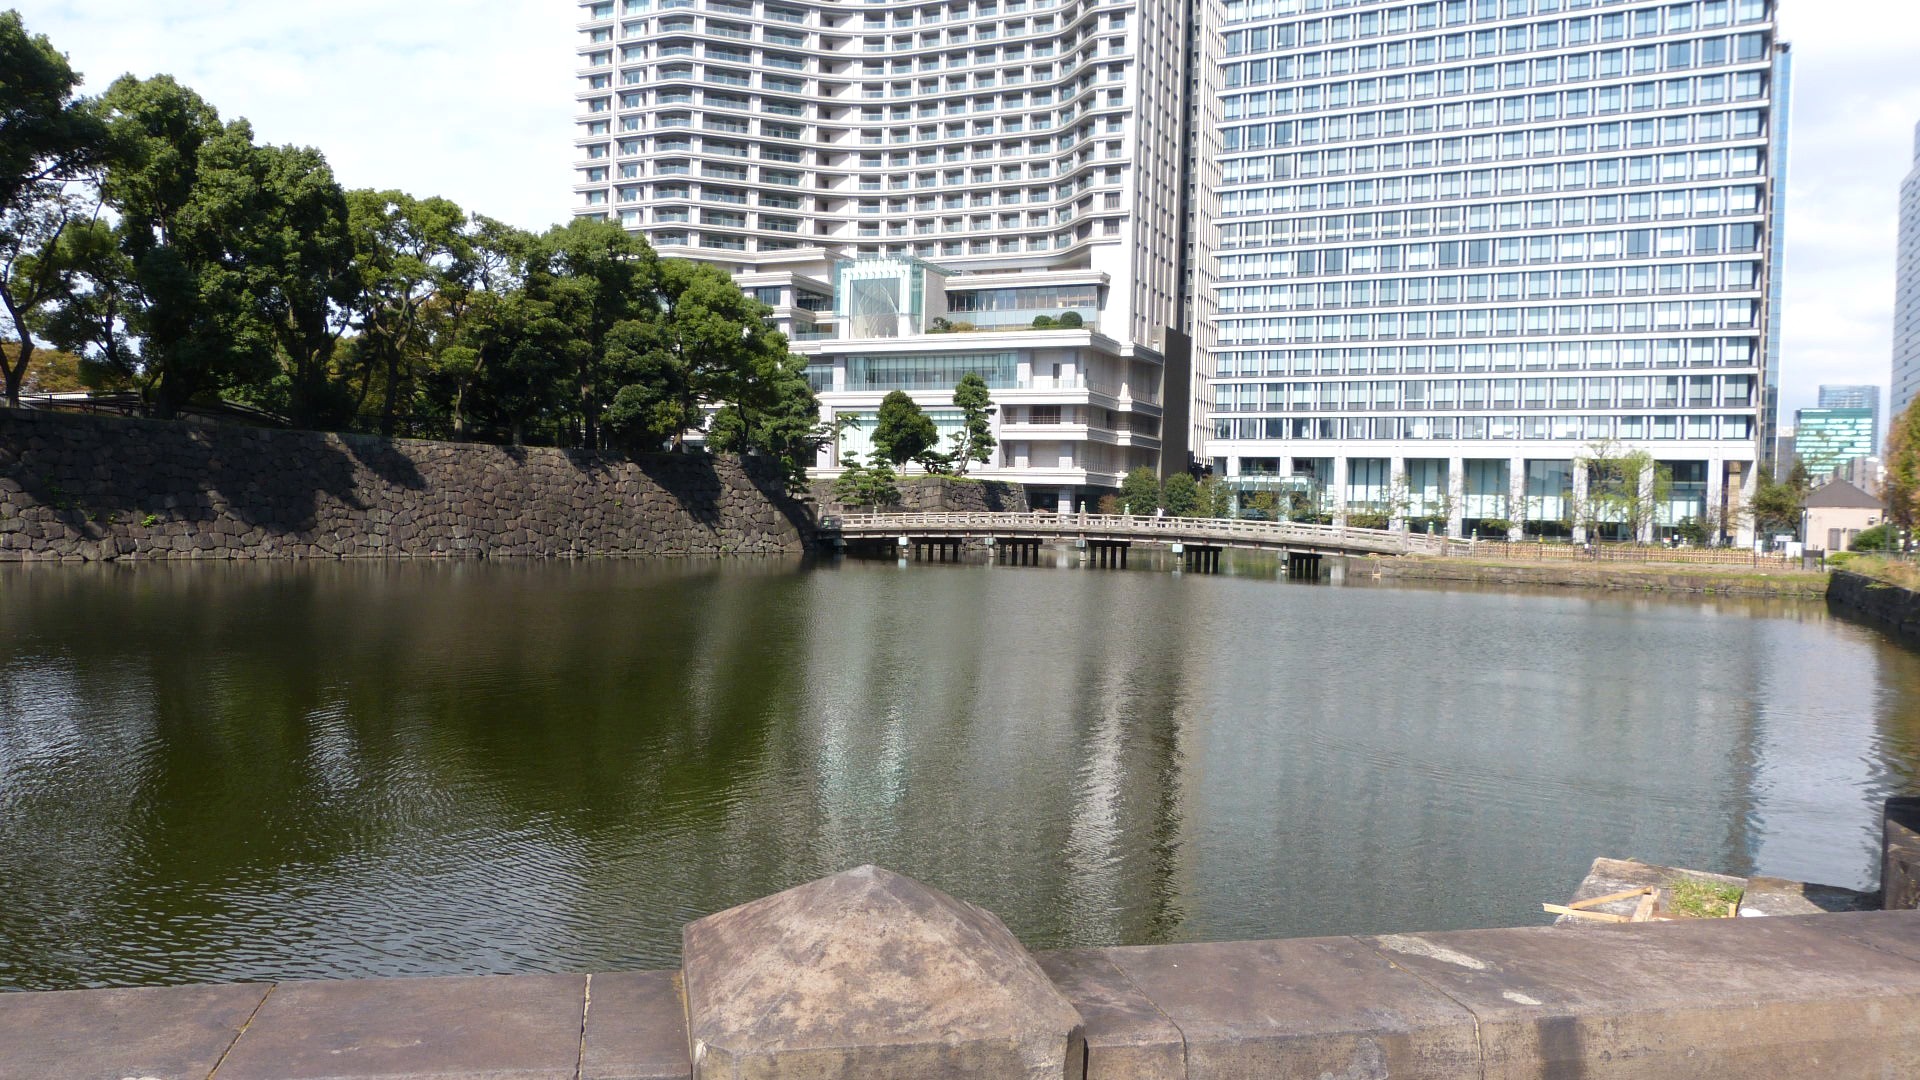 water-filled moat with tall modern buildings in the background